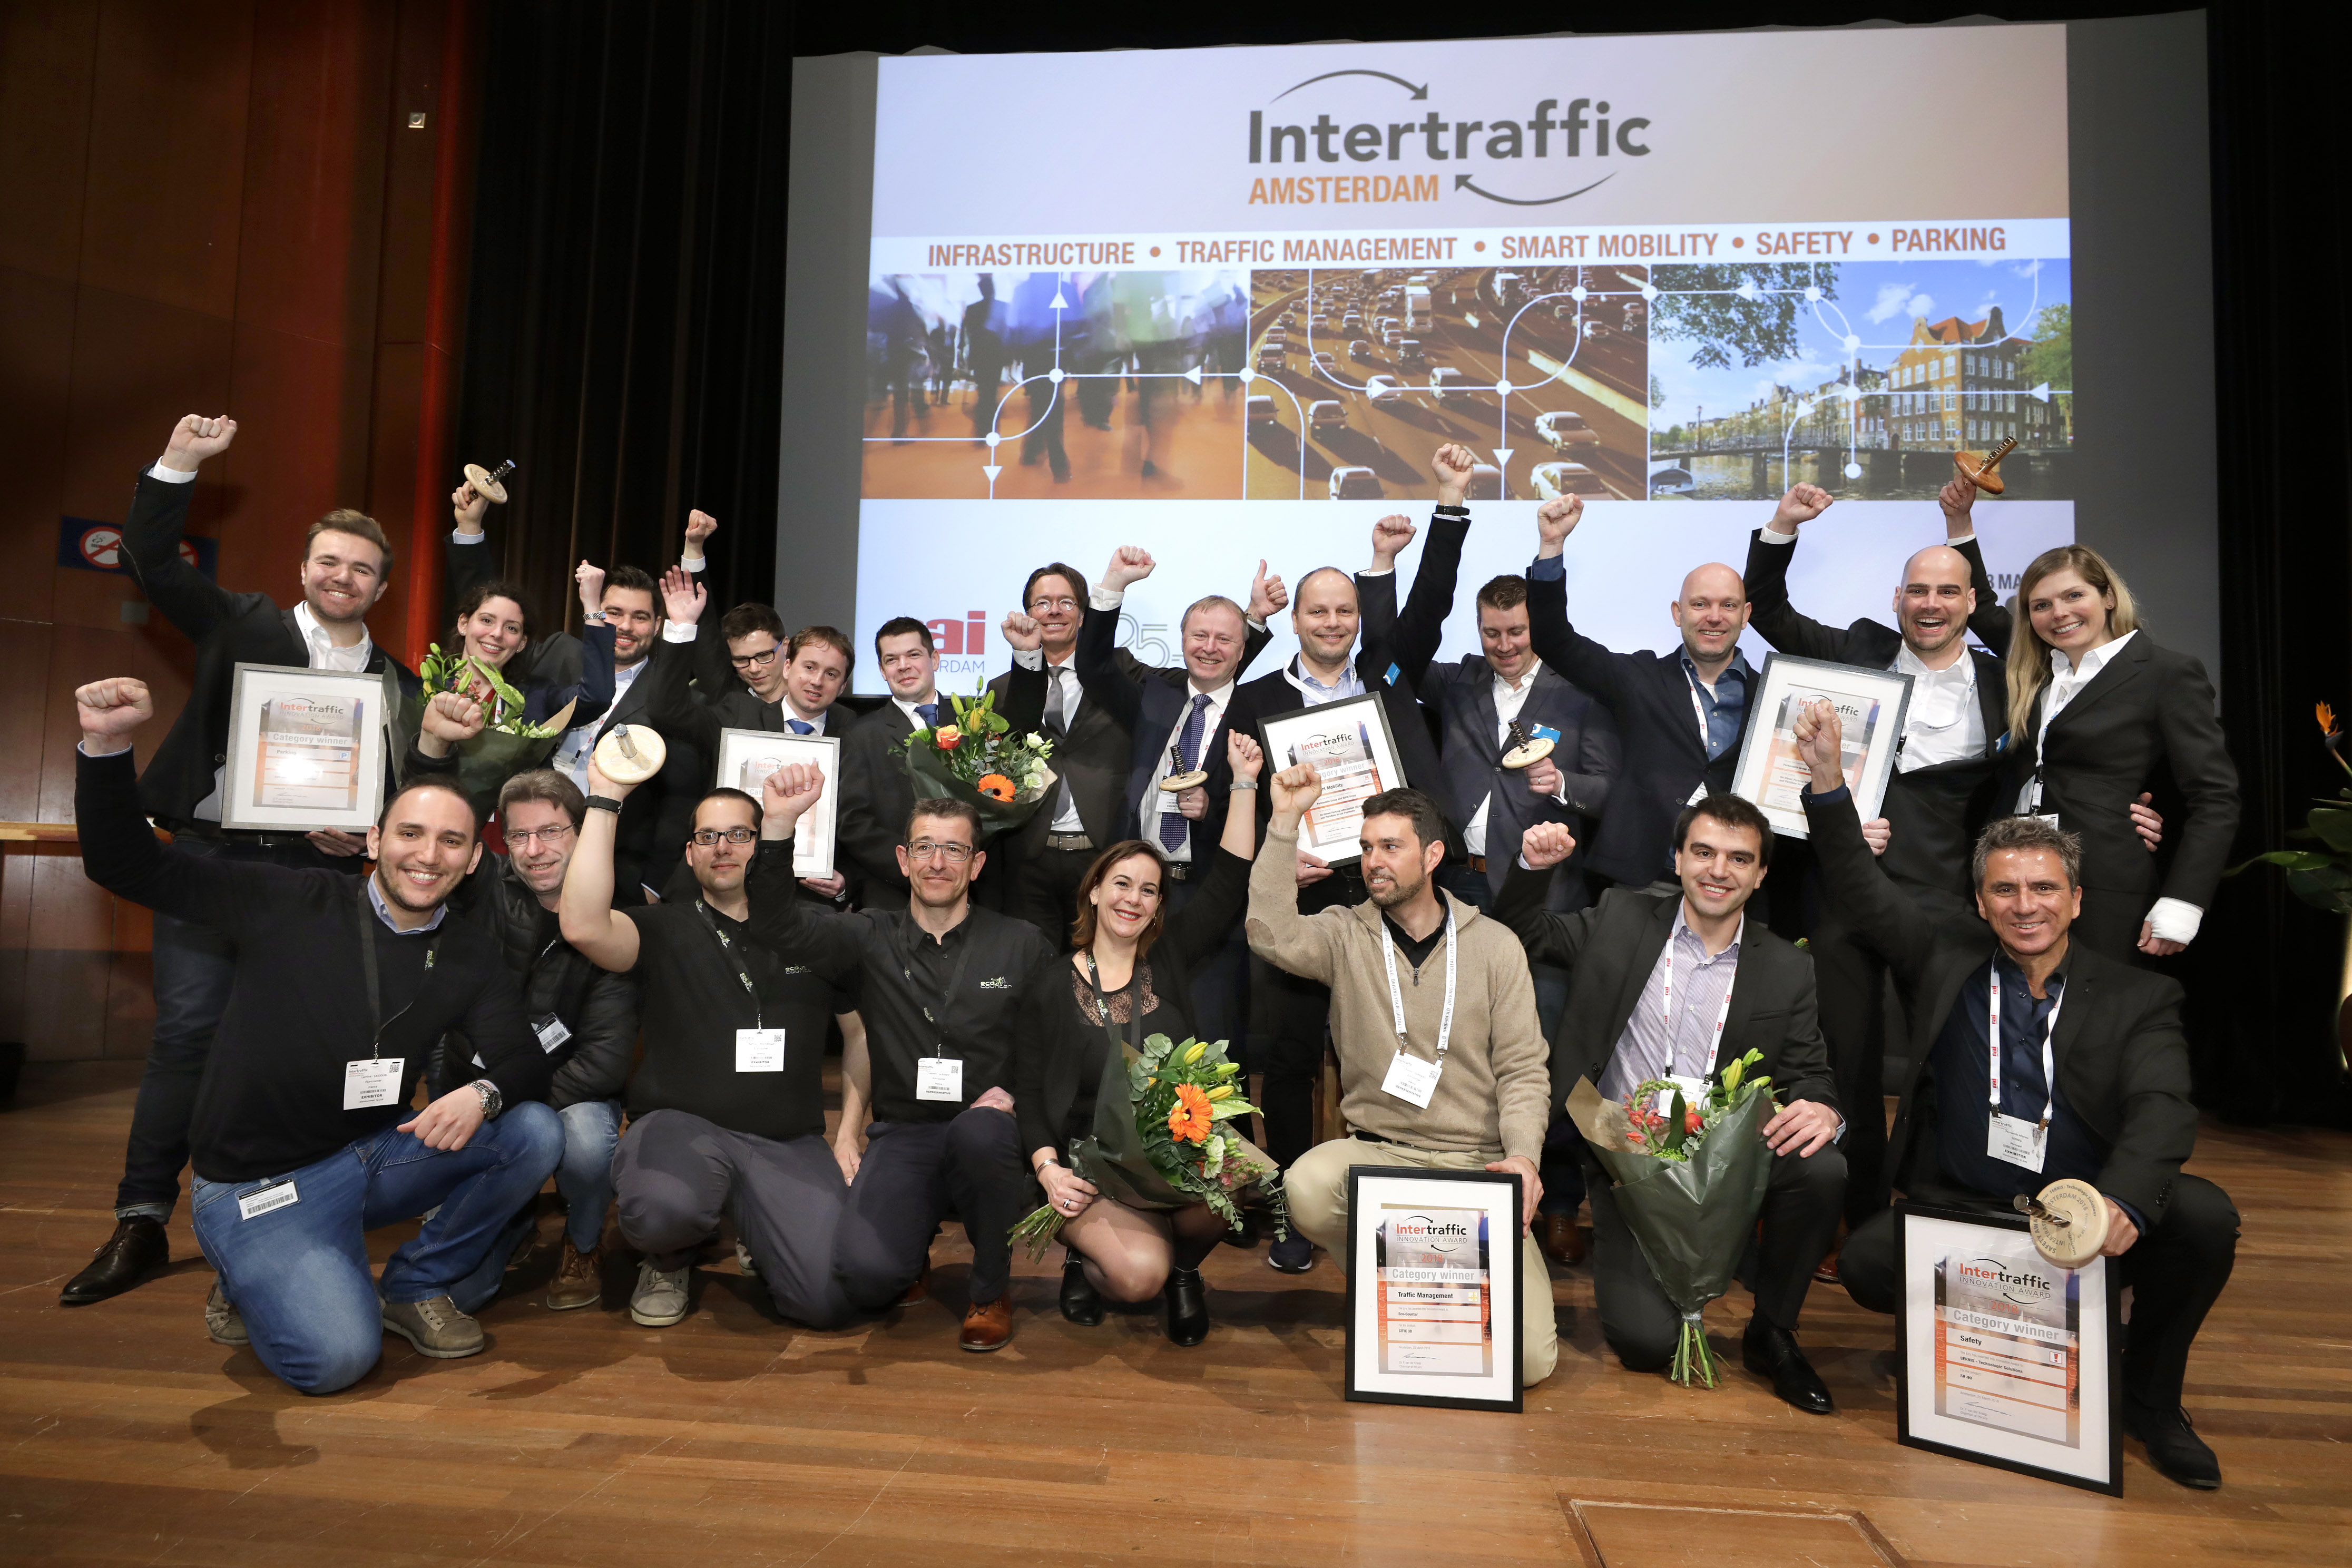 Previous winners for the Intertraffic Amsterdam Awards